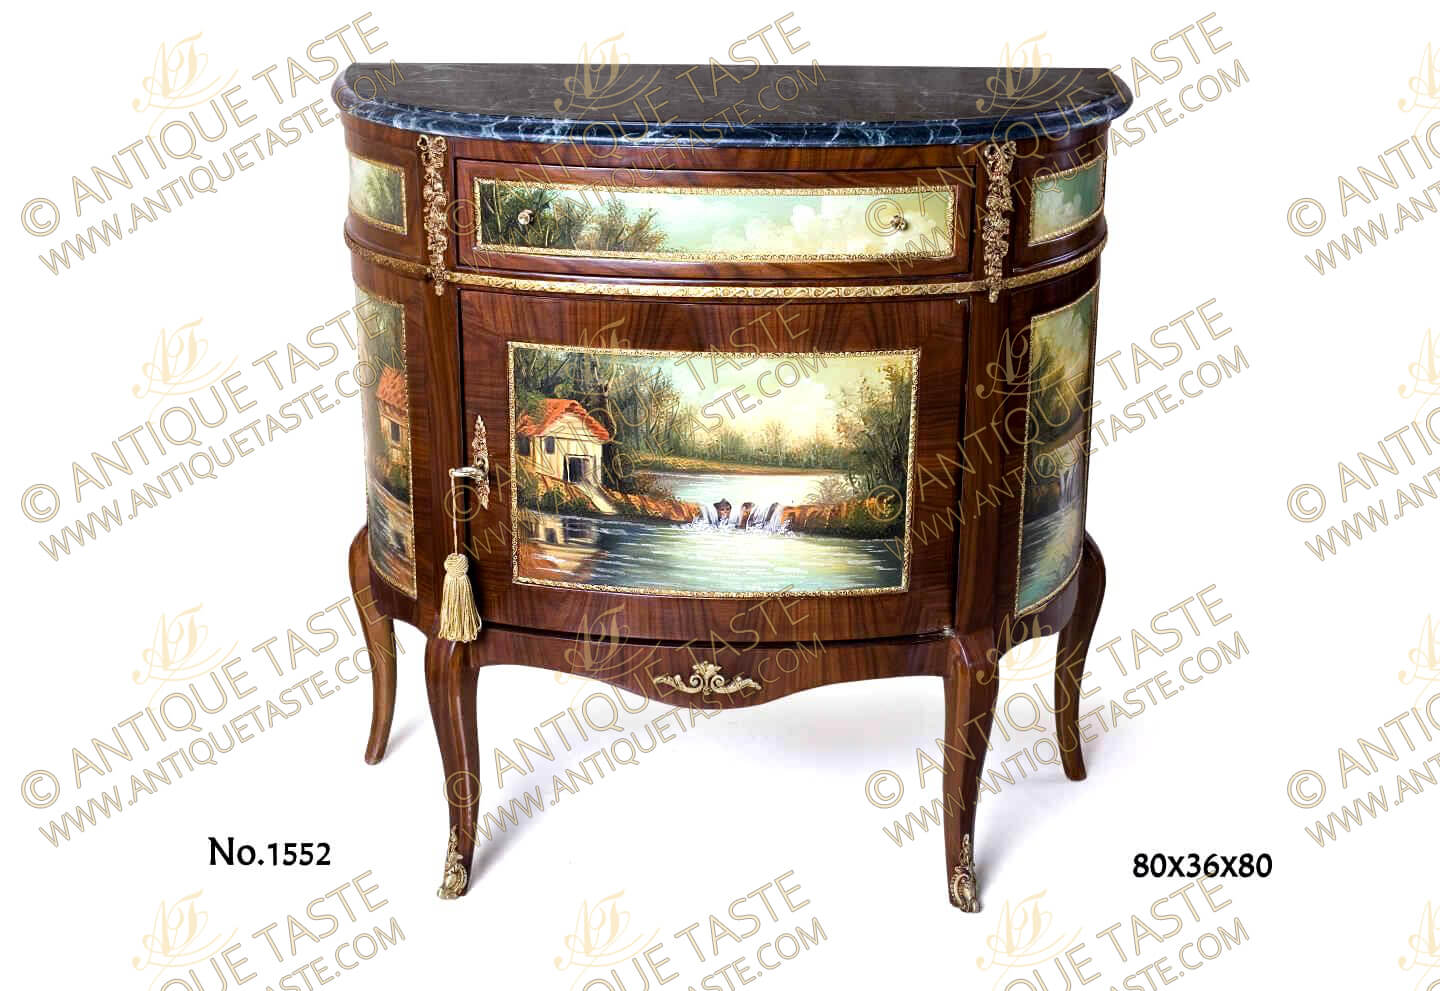 Elegant French Louis XV and Vernis Martin style D shaped cabinet with one drawer and one door, cut veneer inlaid, marble topped, finely hand painted on front and sides with landscape scenes and ornamented with engraved ormolu encadrement, richly chased ormolu ribbon tied acanthus chutes, ormolu keyhole escutcheon and ormolu foliate pierced sabots.